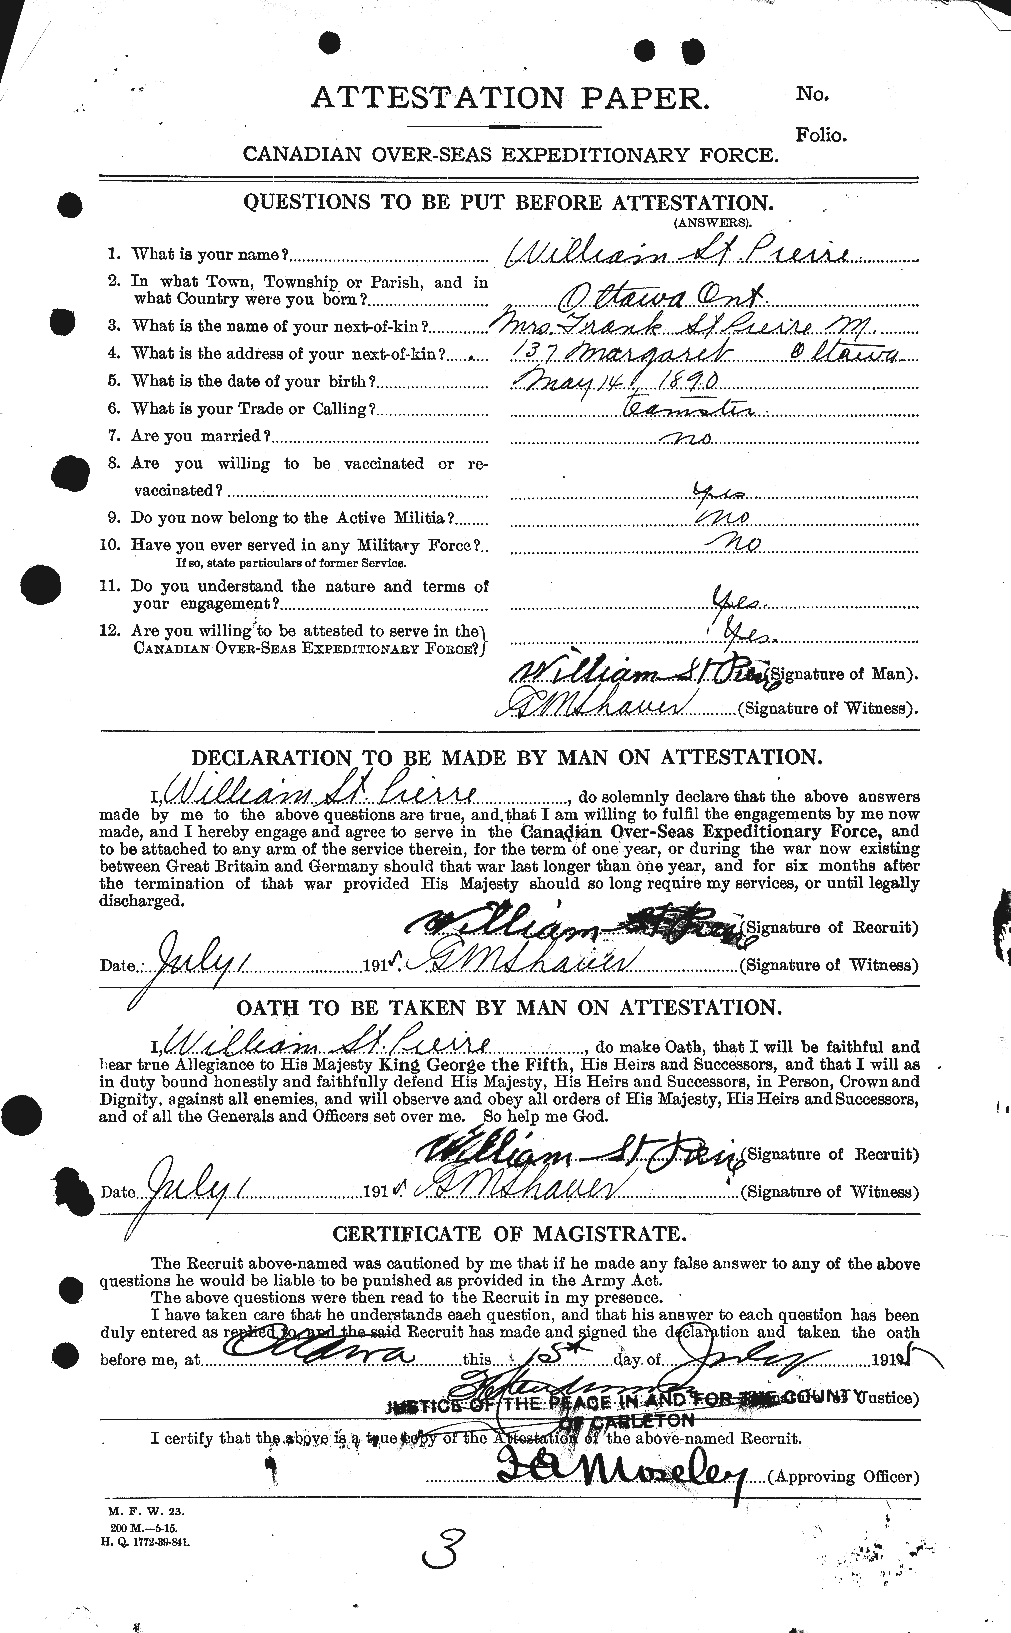 Personnel Records of the First World War - CEF 077548a